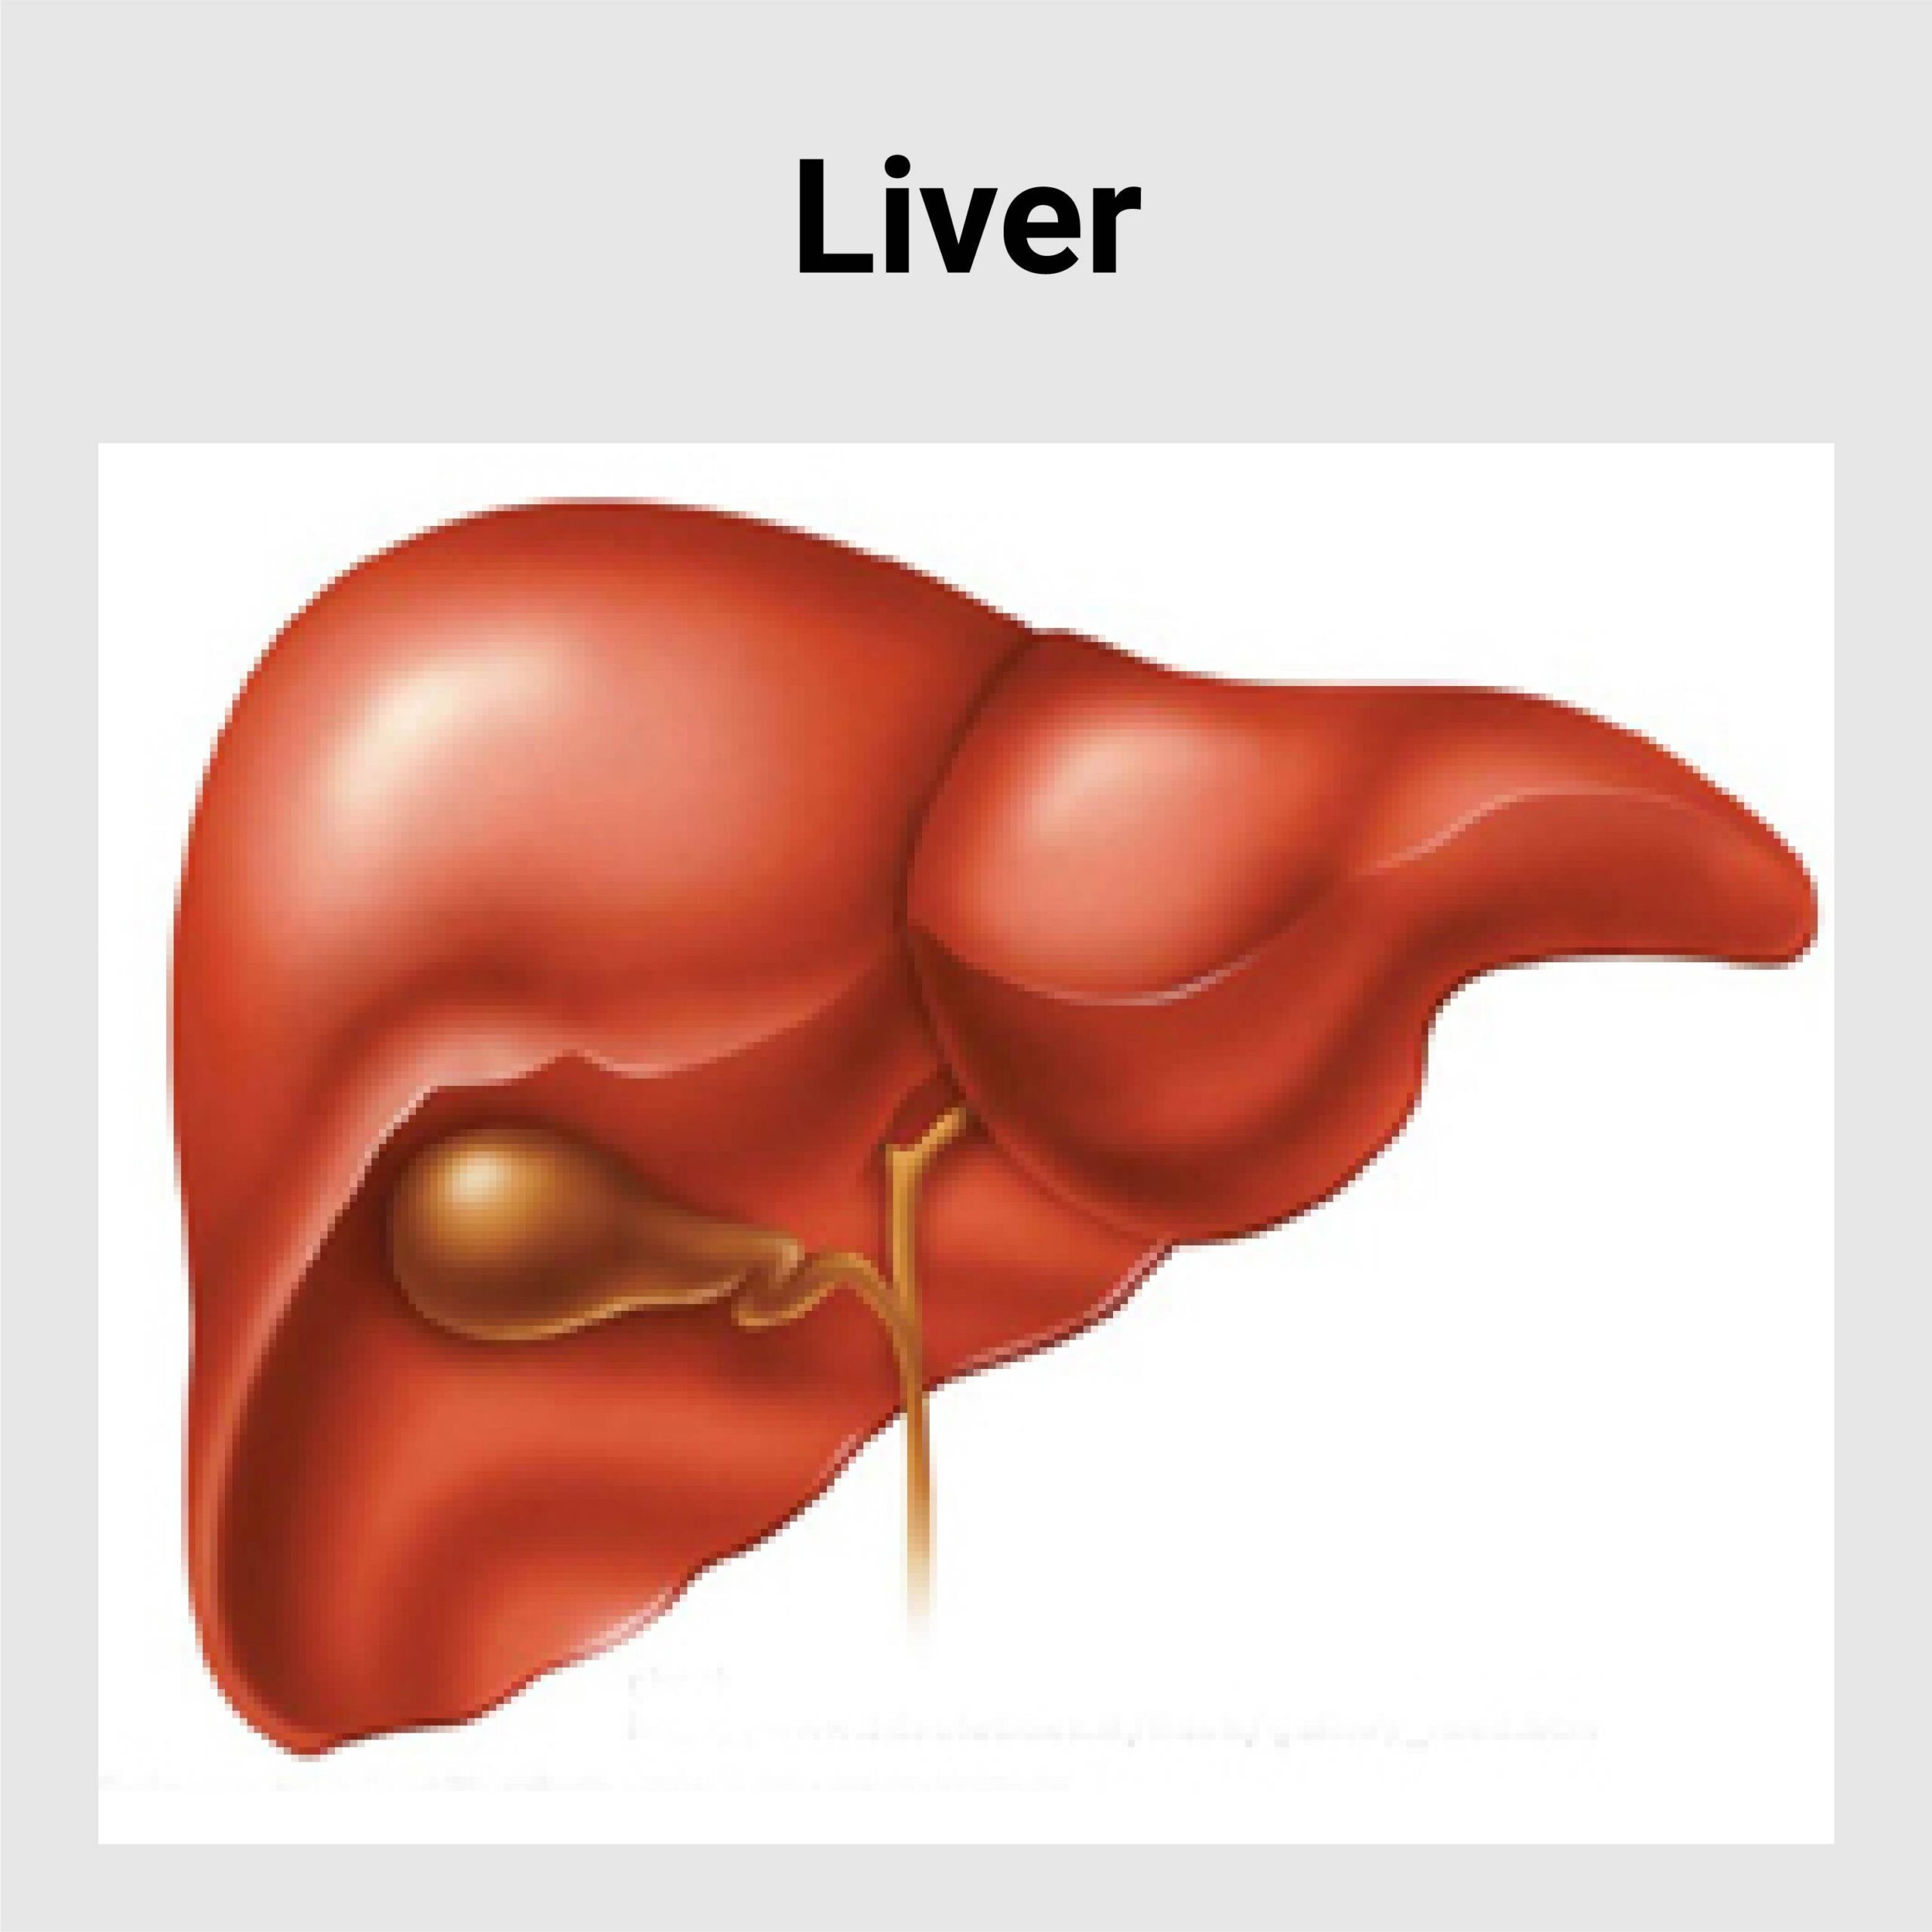 research project on liver disease